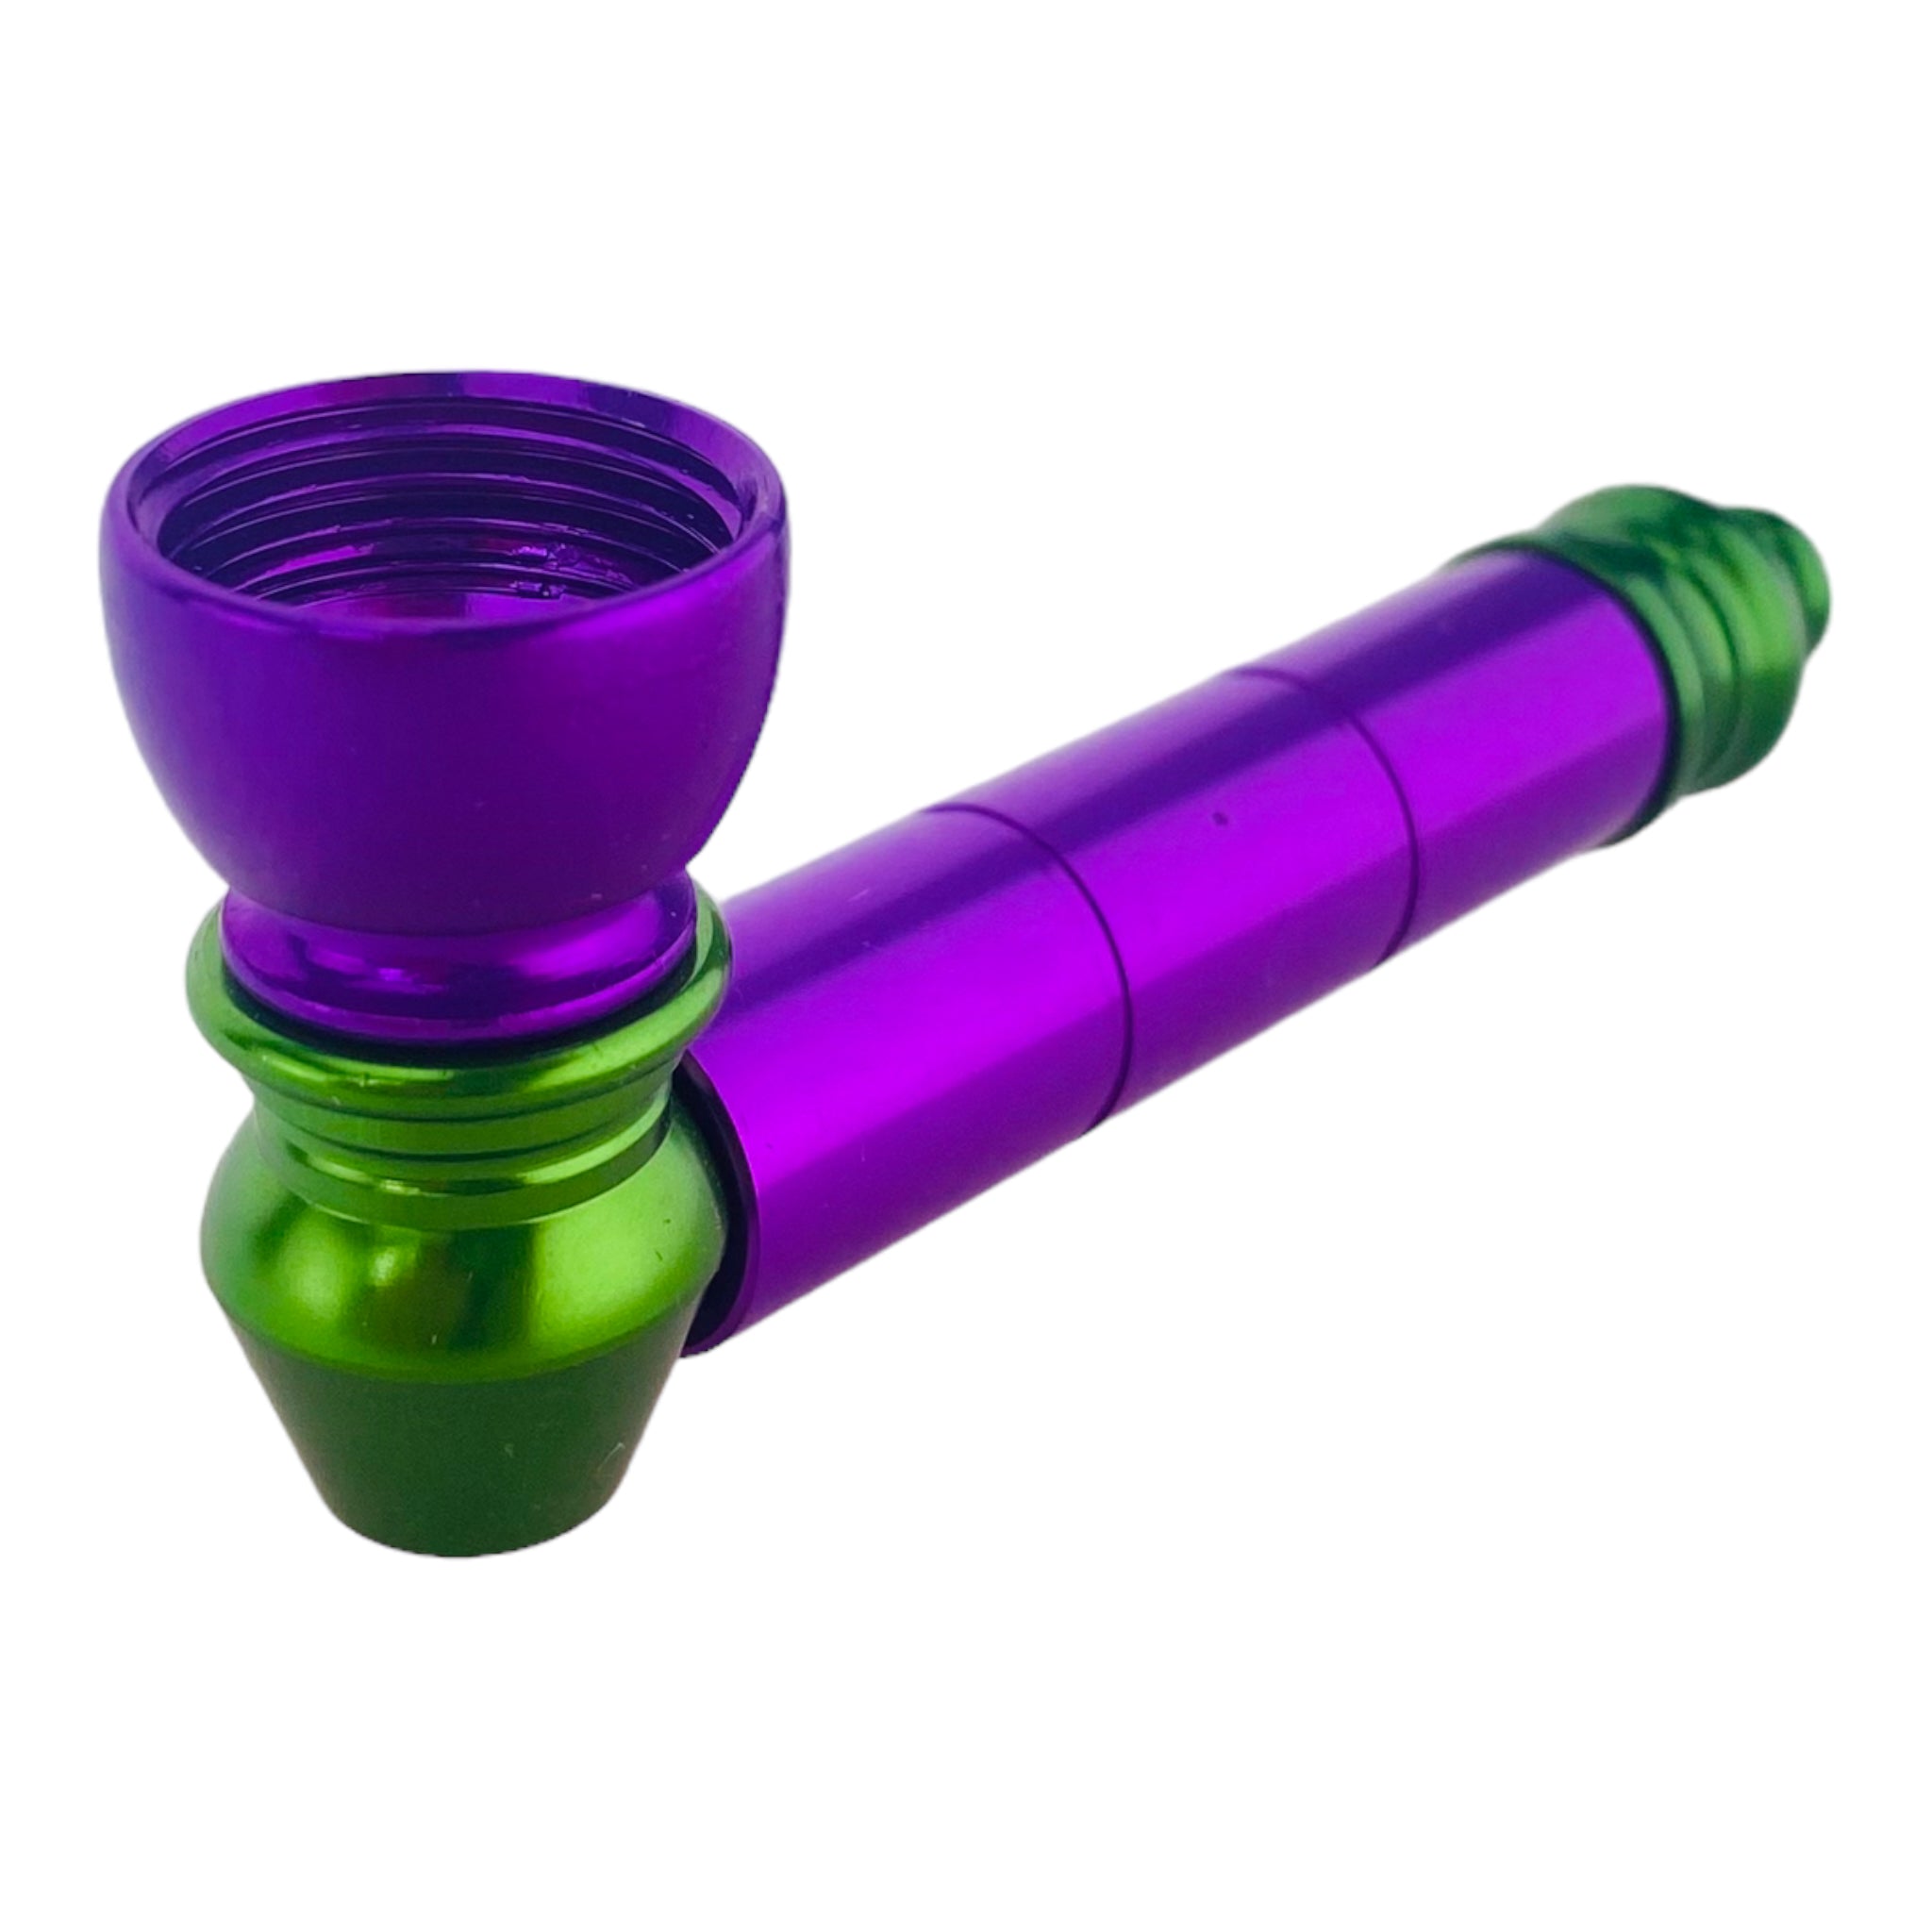 Metal Hand Pipes - Purple & Green Basic Aluminum Metal Pipe With Small Chamber